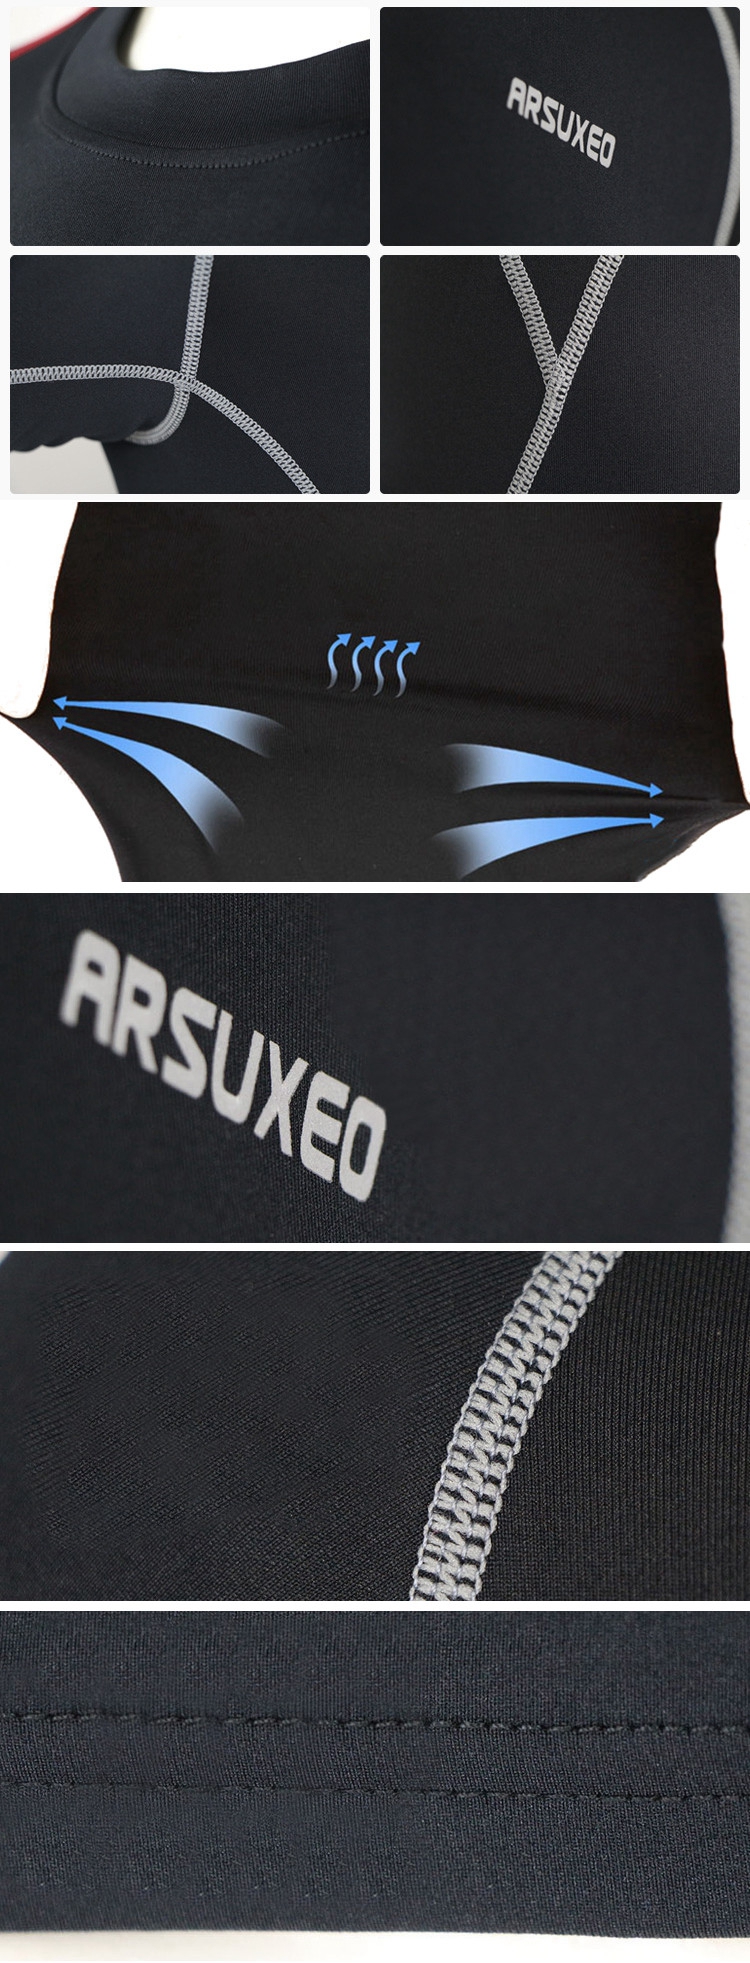 ARSUXEO-Outdoor-Cycling-Short-Sleeve-Elasticity-Tight-Bicycle-Clothes-Jersey-Breathable-Quick-Dry-1067752-8